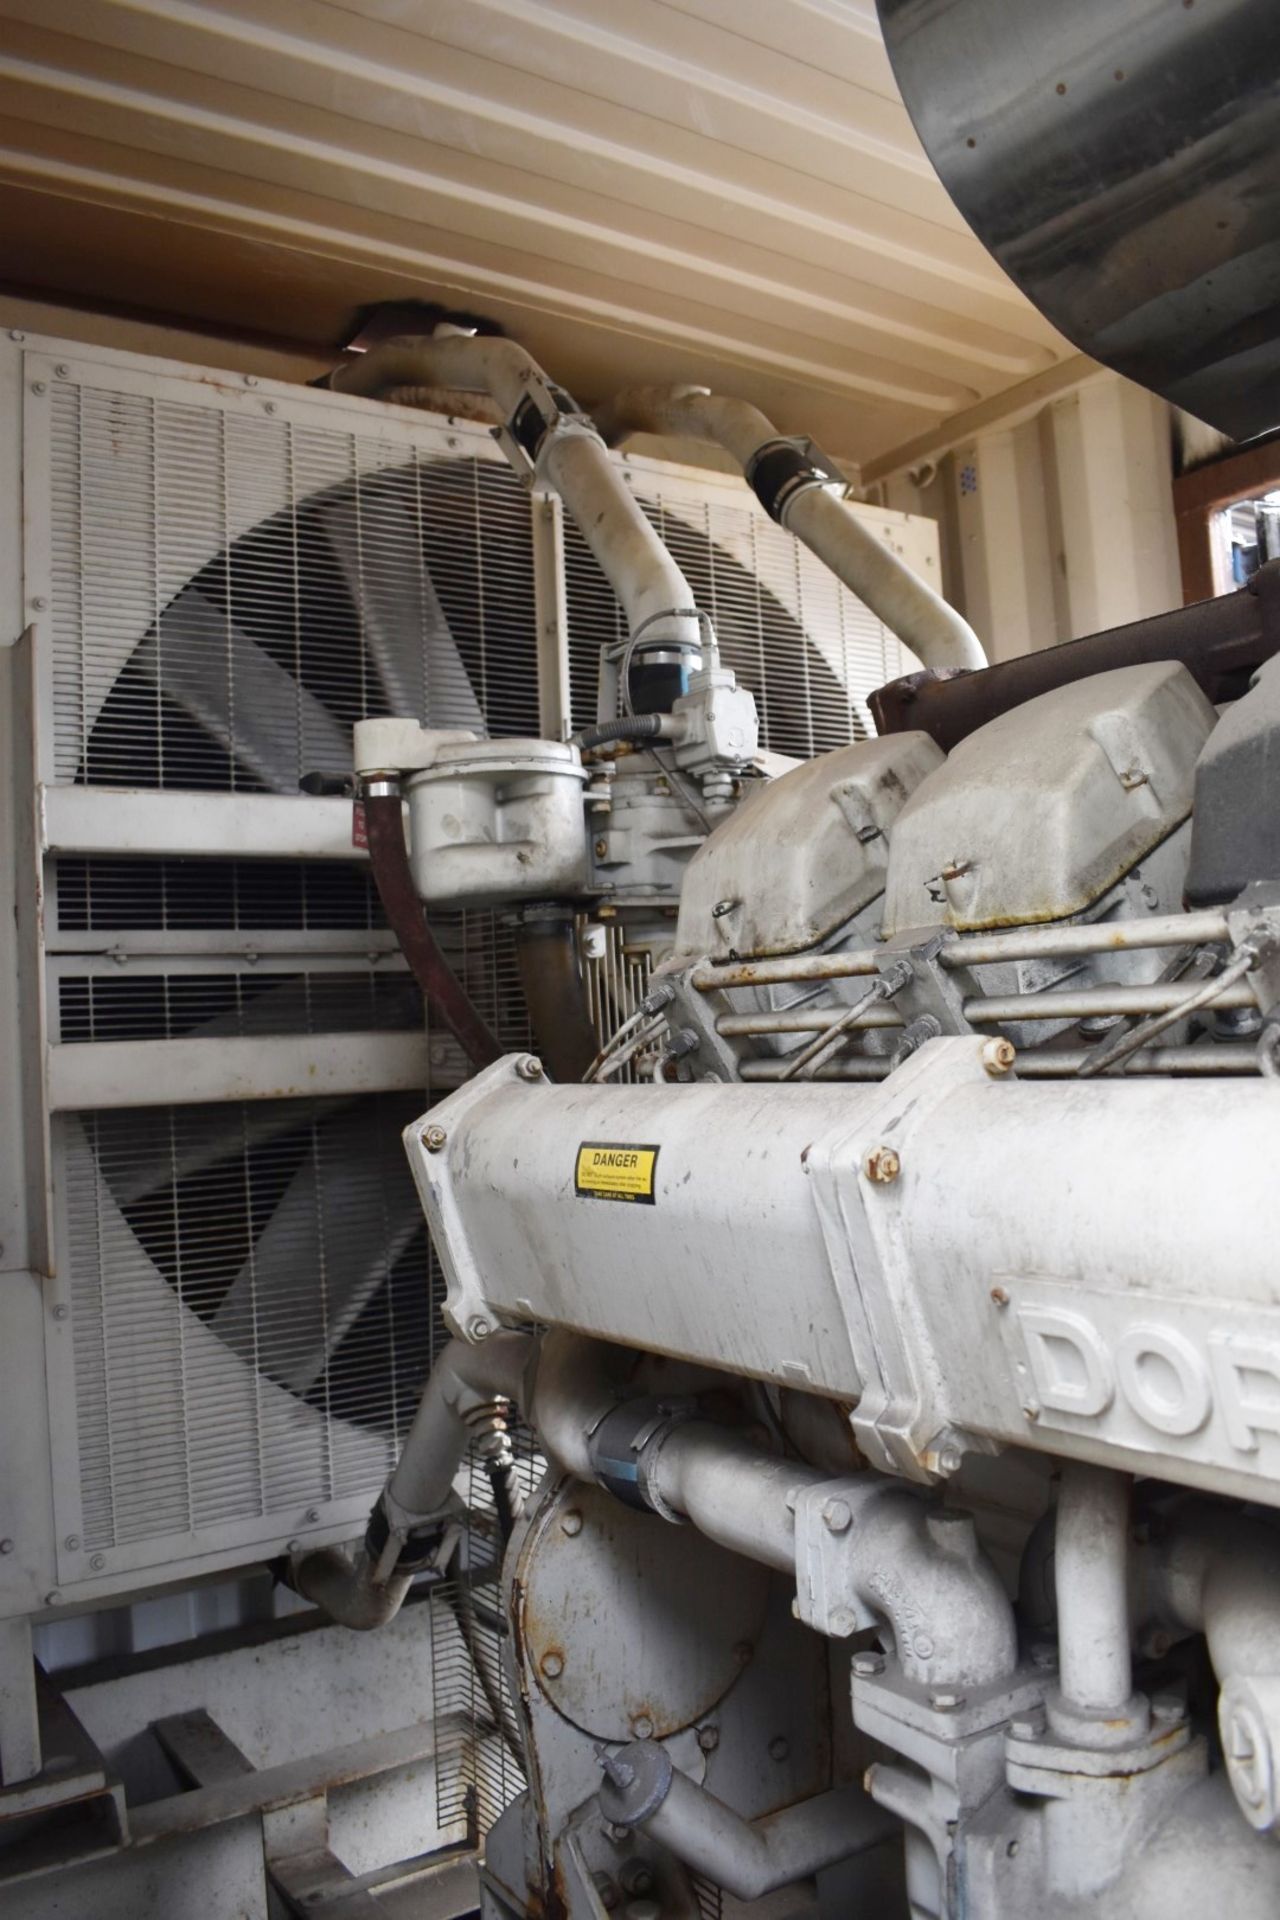 1 x Puma 1000kw Generator With Doorman Engine - Housed in 20ft Shipping Container - CL547 - No VAT - Image 28 of 28